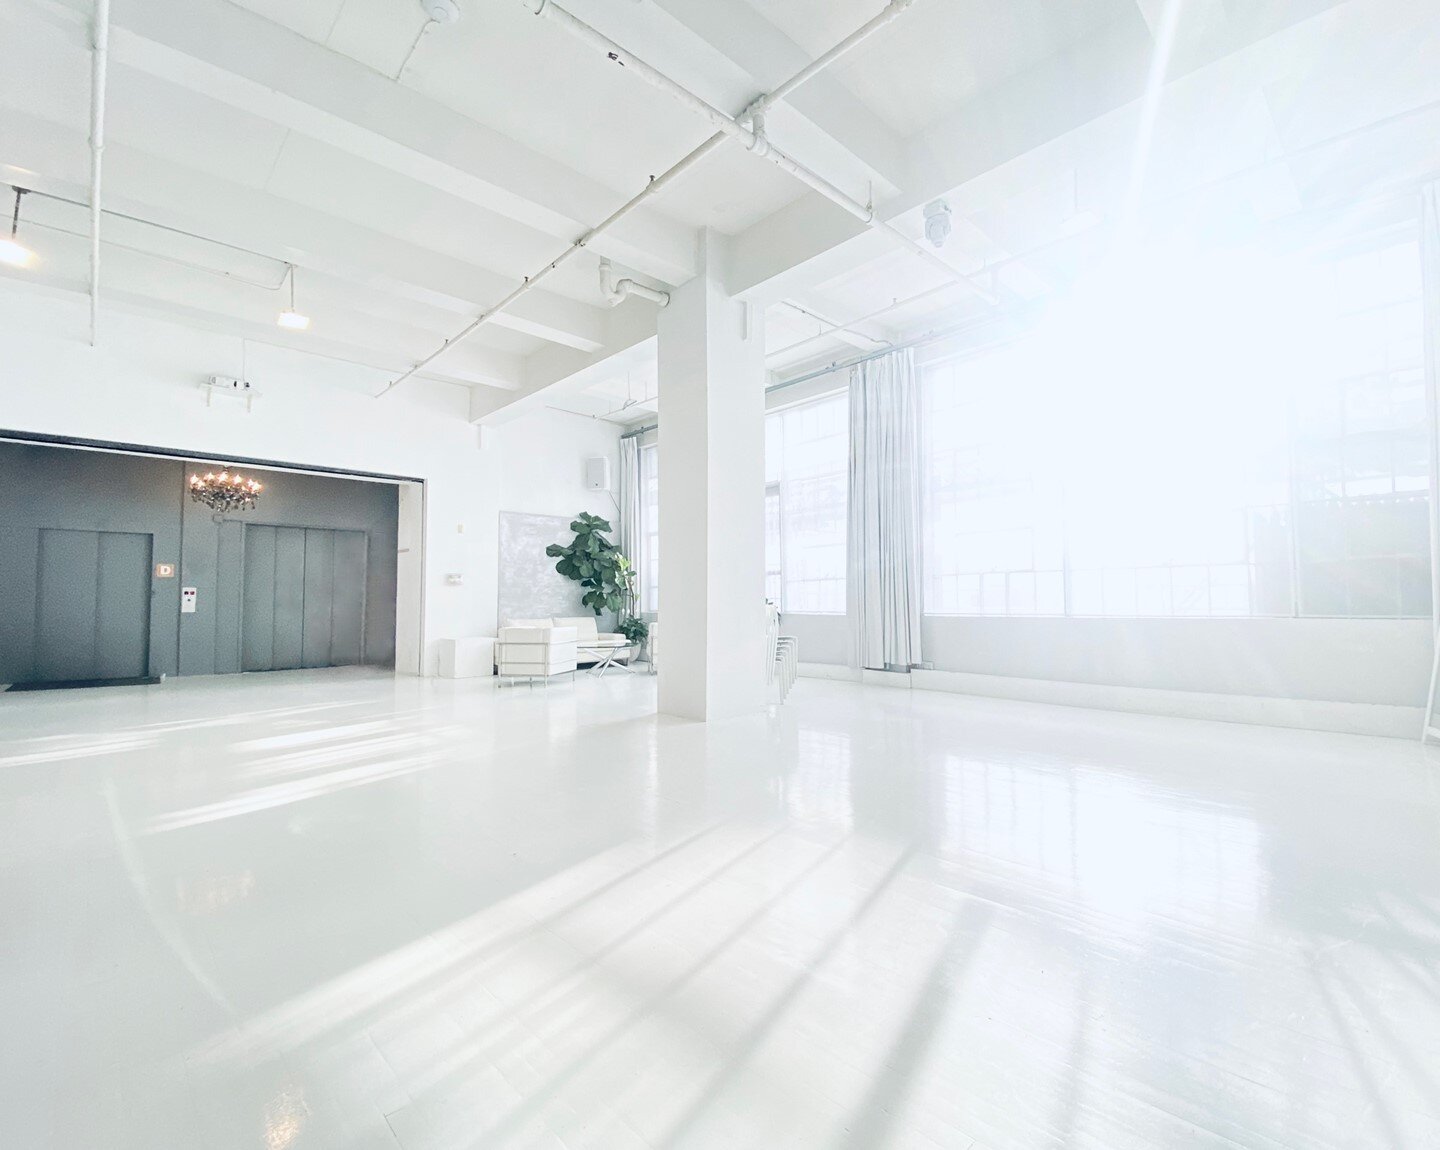 Offering 2,00 SF, Loft 10 is a perfect space for photo and film productions. Loft 10 can also be combined with Studio 3 for a full floor rental studio. The Freight Elevator opens into the space with easy access to the building&rsquo;s Loading Dock.

